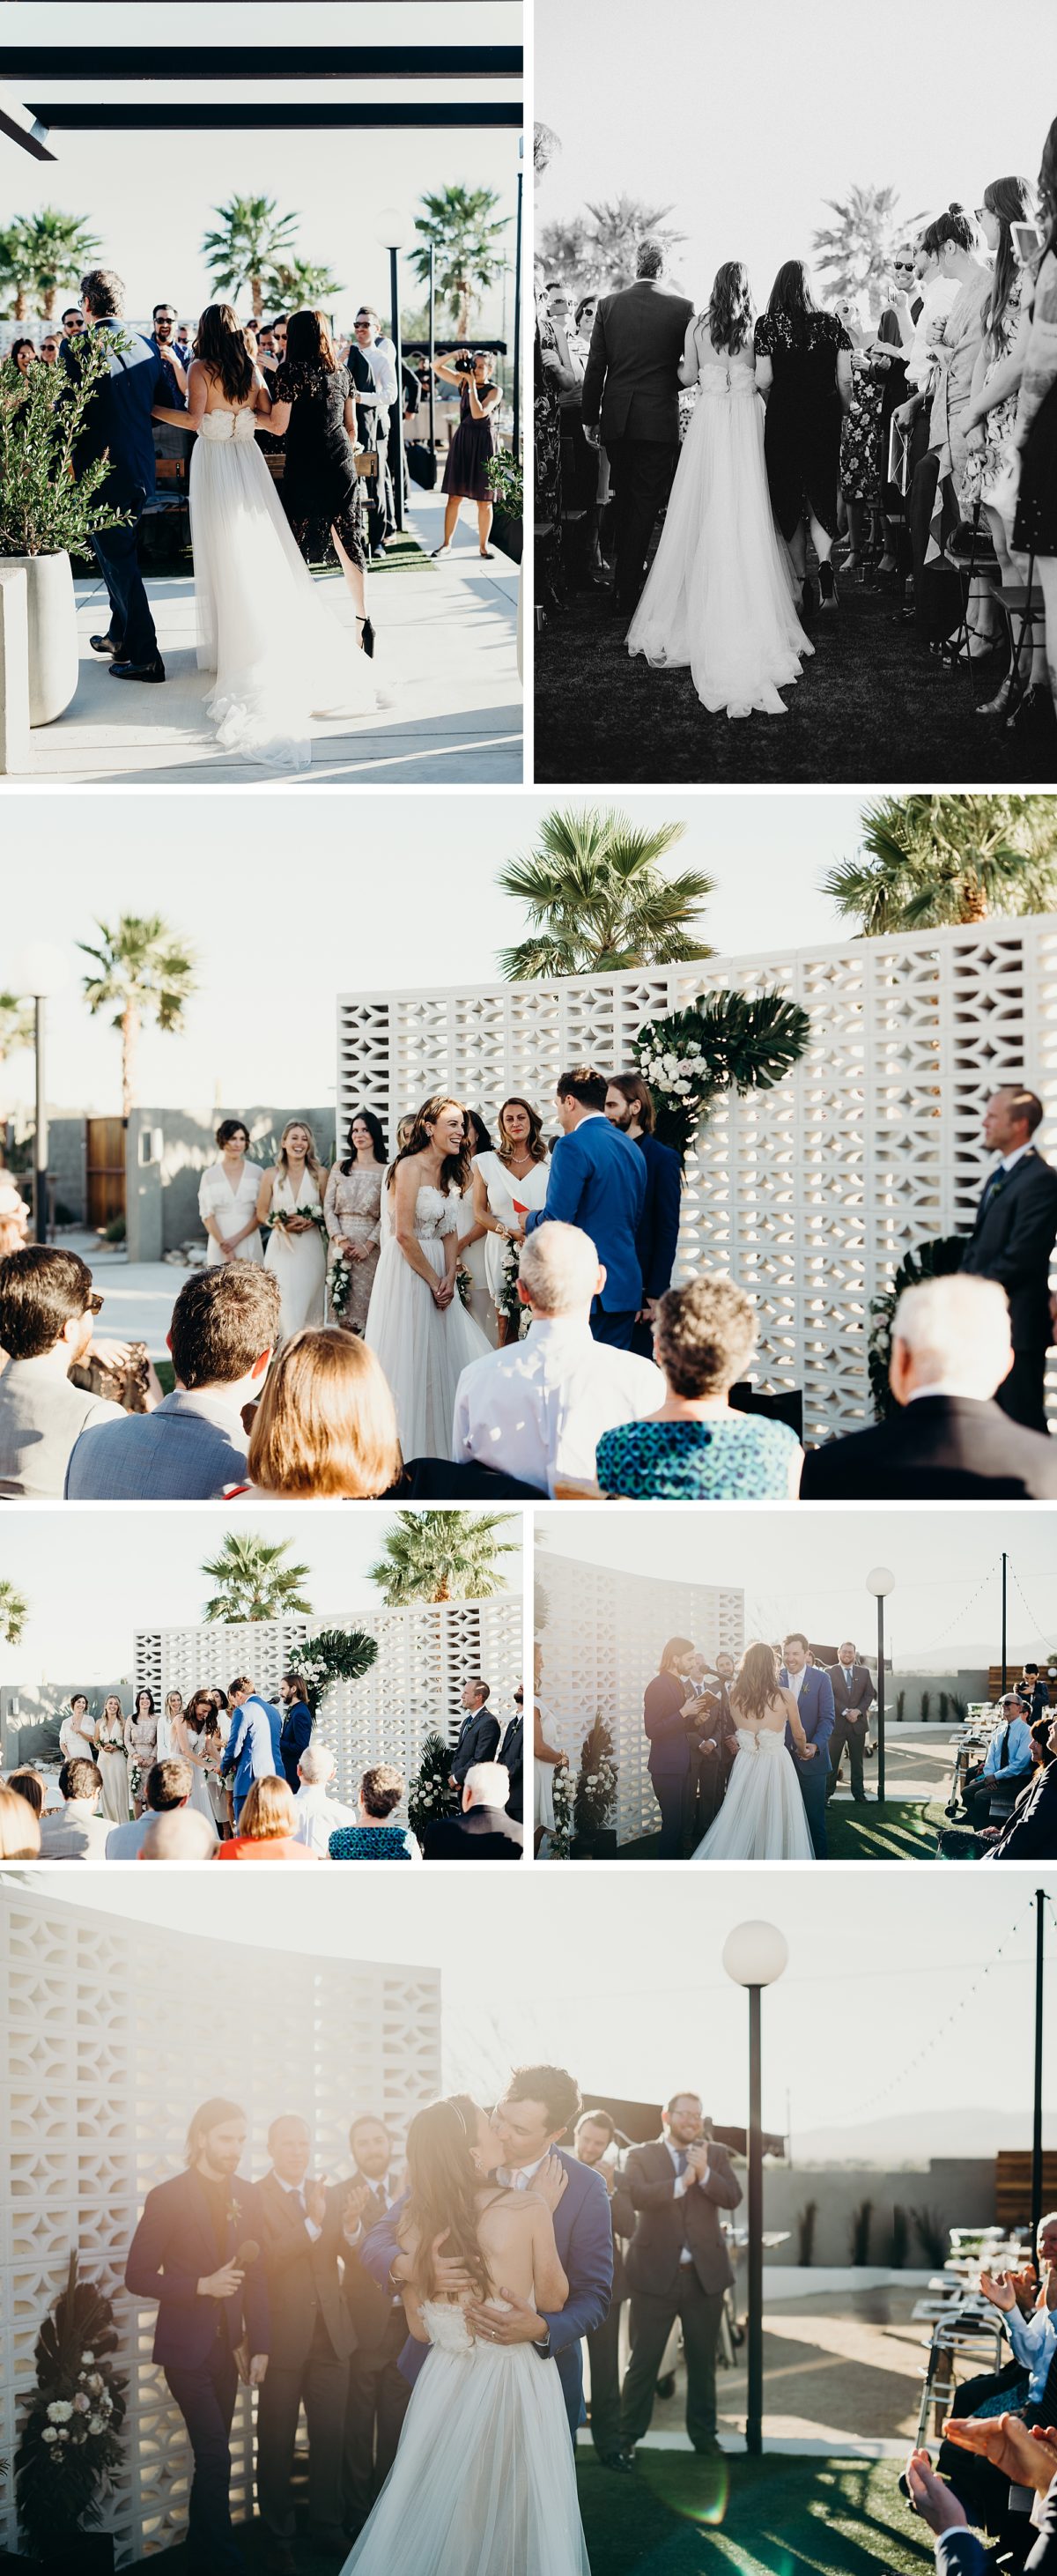 A gorgeous outdoor ceremony in the desert photographed by Briana Morrison.